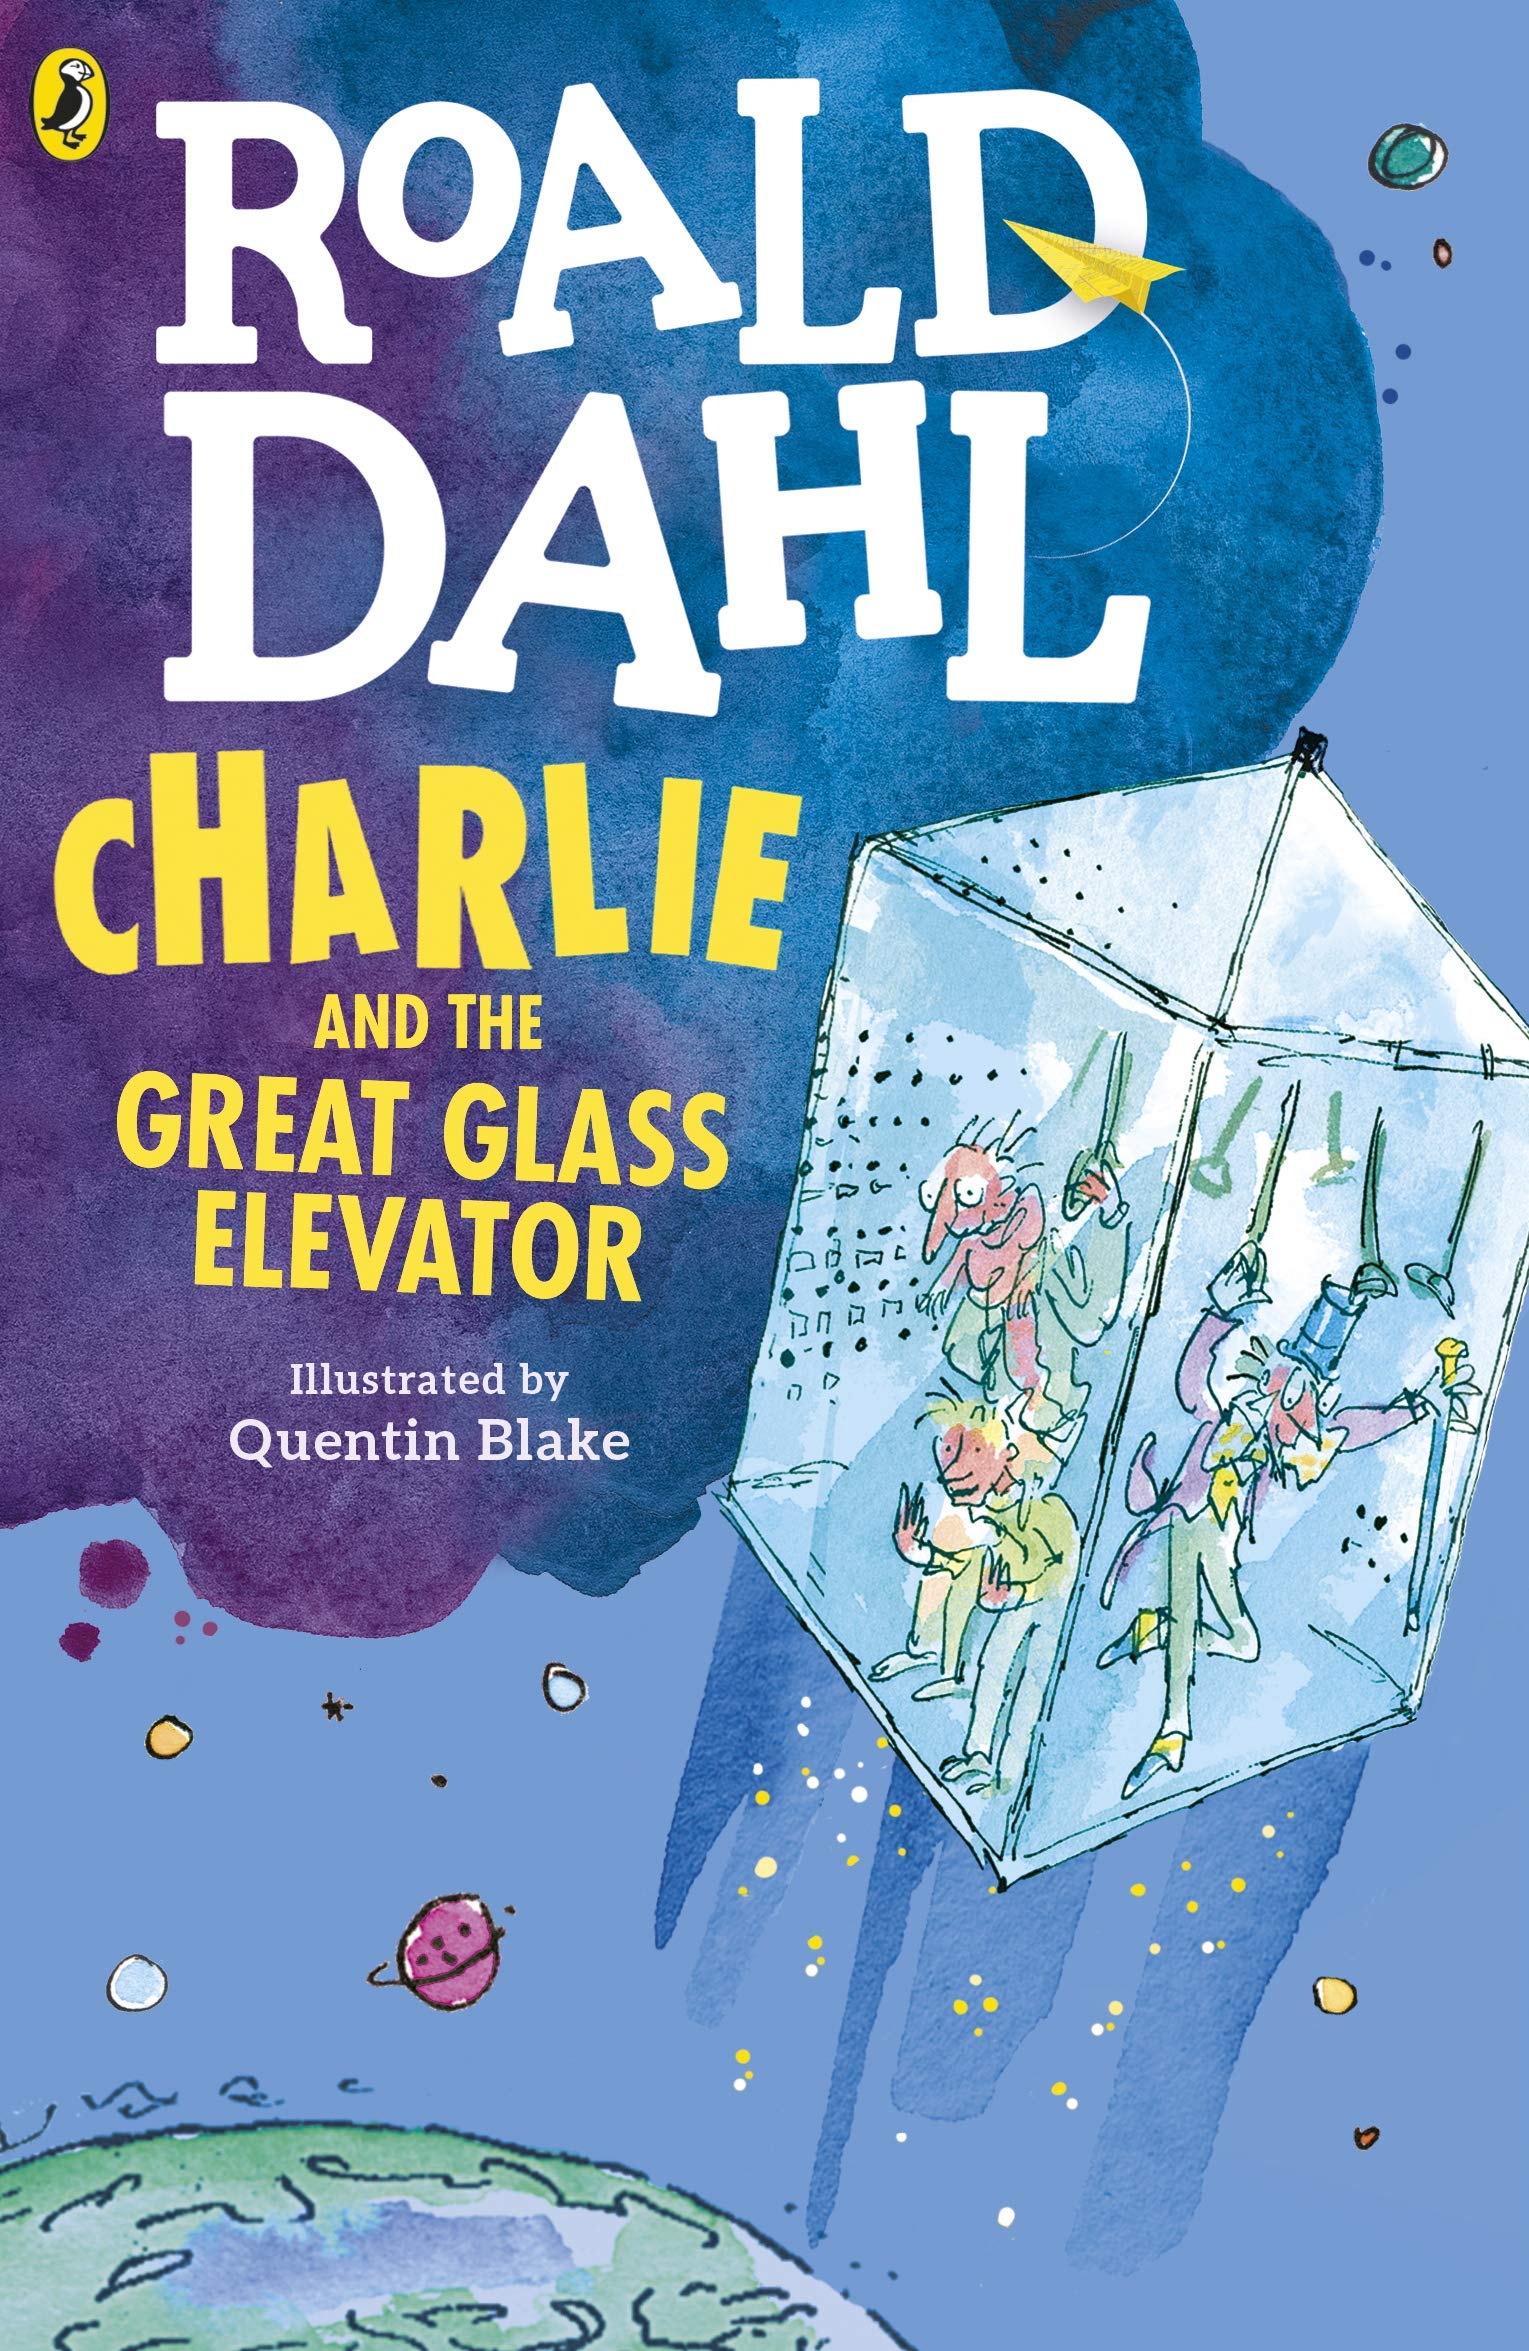 Roald Dahl – Charlie And The Great Glass Elevator